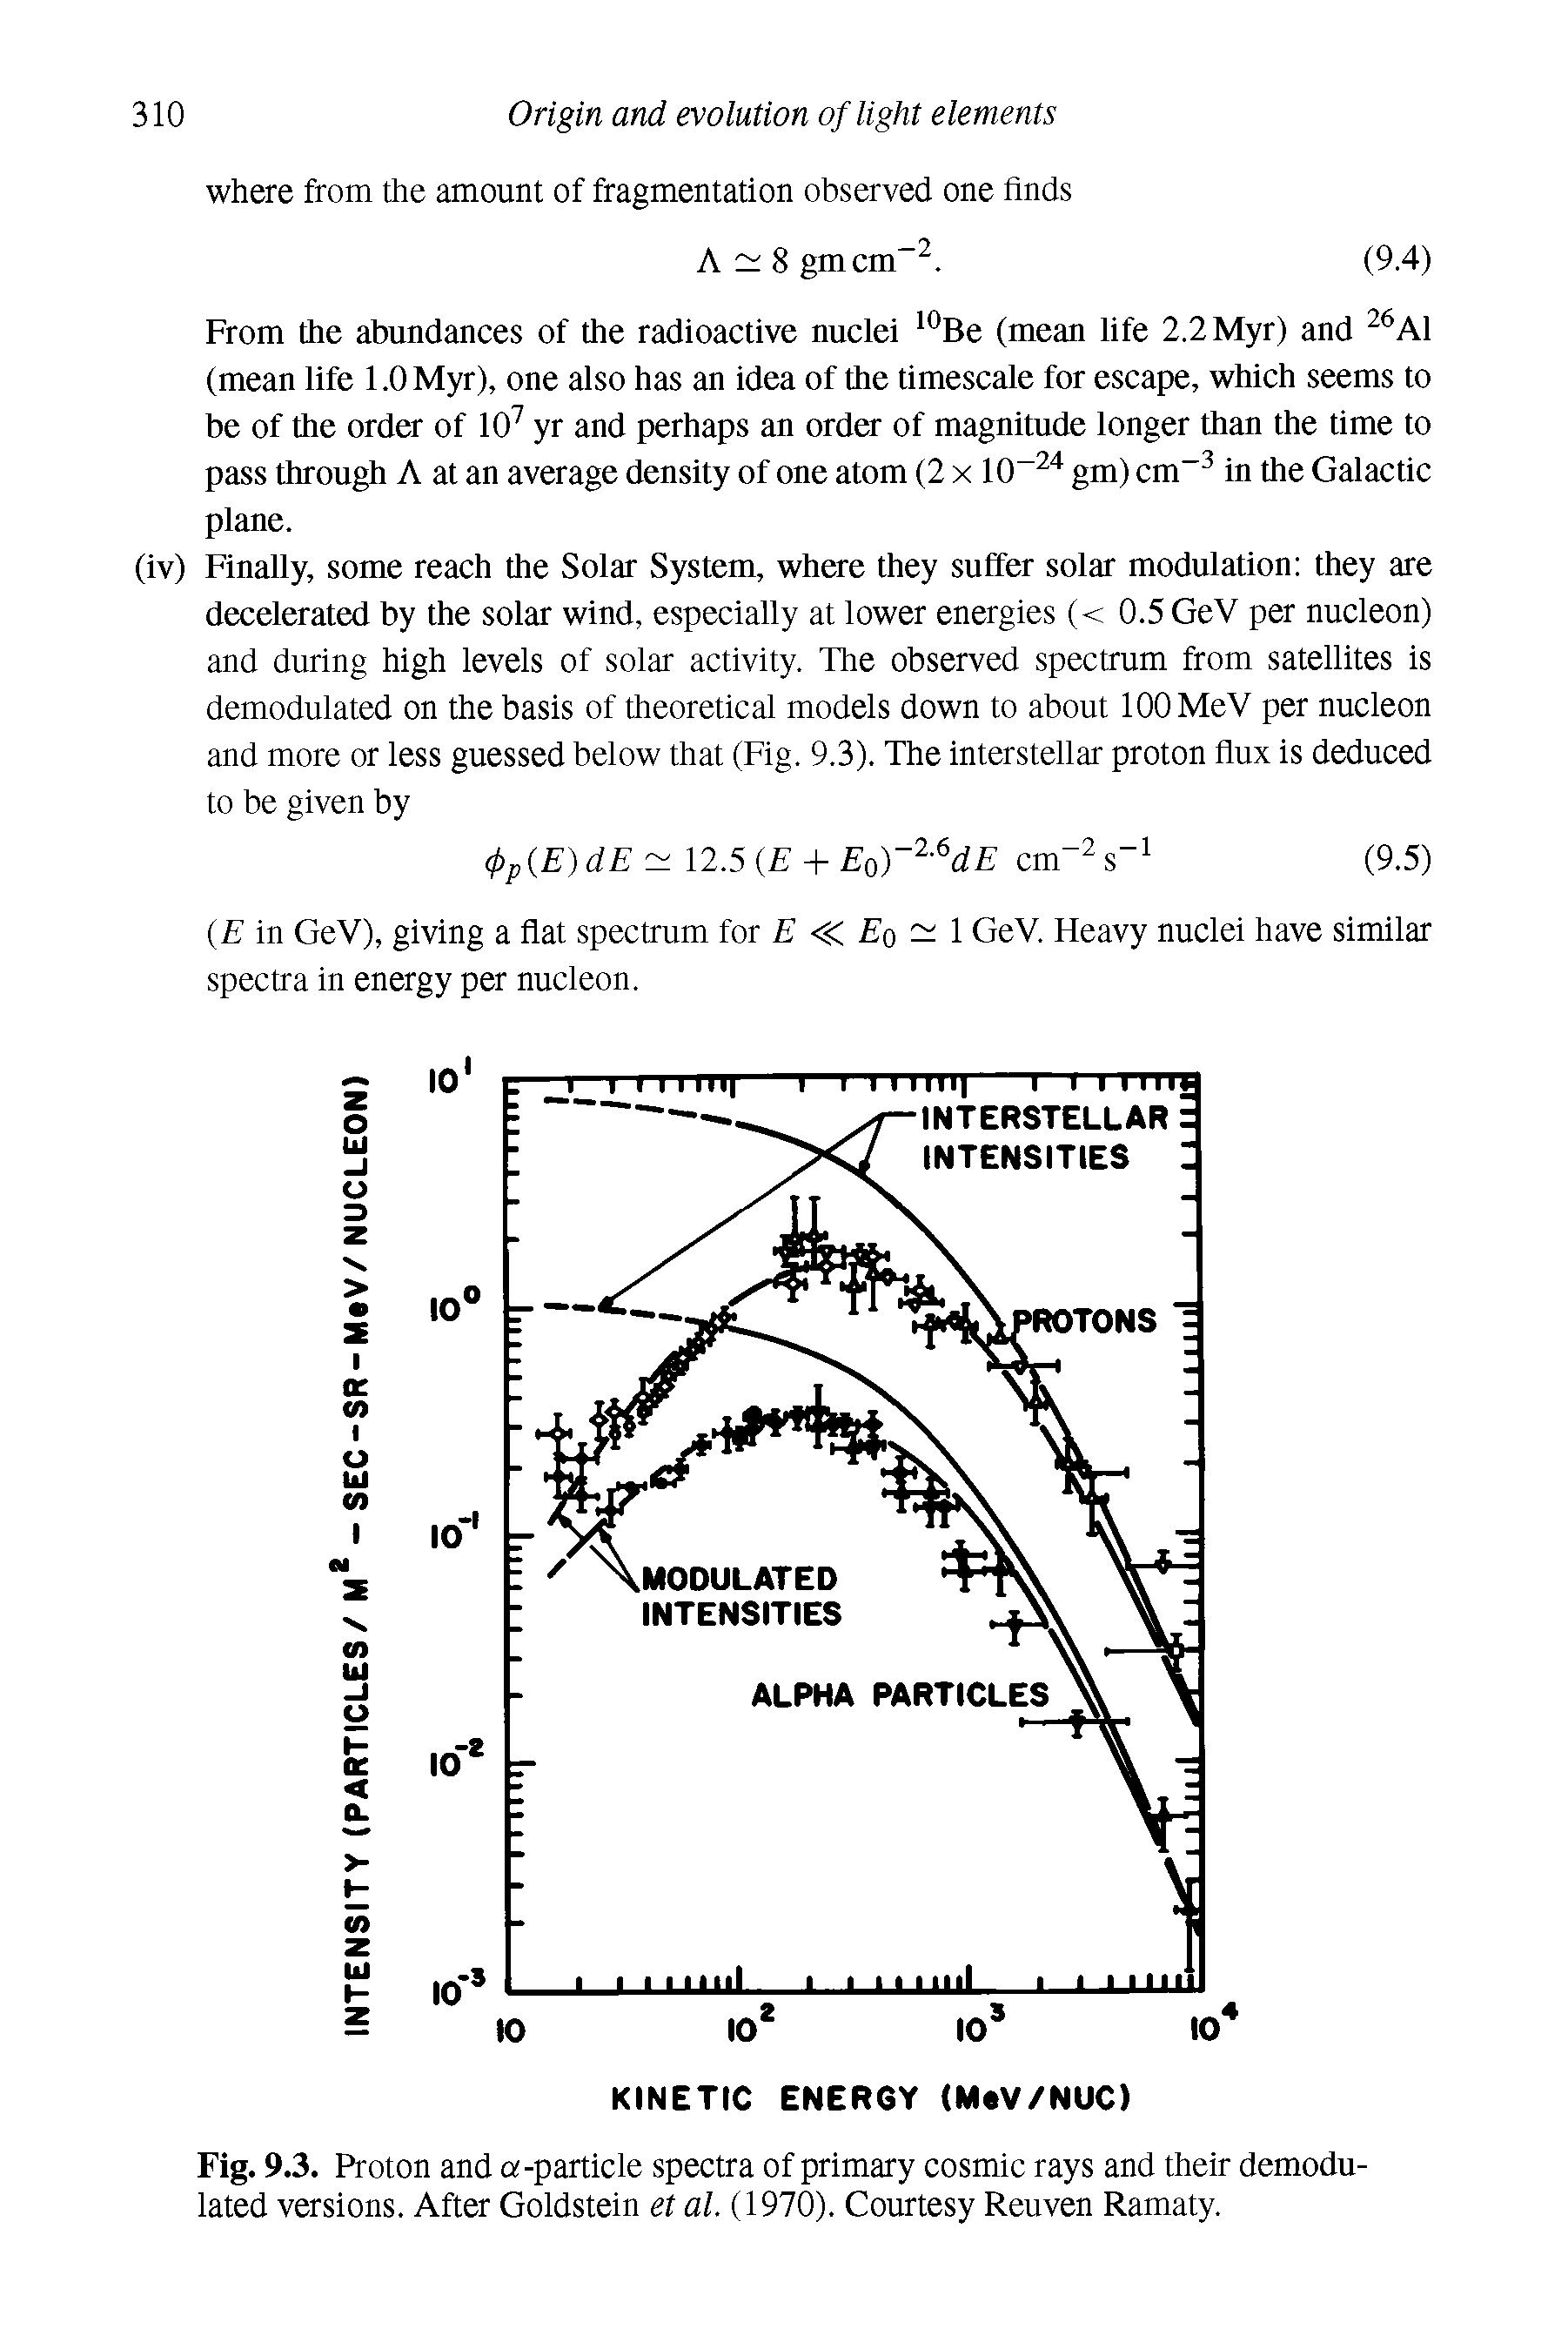 Fig. 9.3. Proton and a-particle spectra of primary cosmic rays and their demodulated versions. After Goldstein et al. (1970). Courtesy Reuven Ramaty.